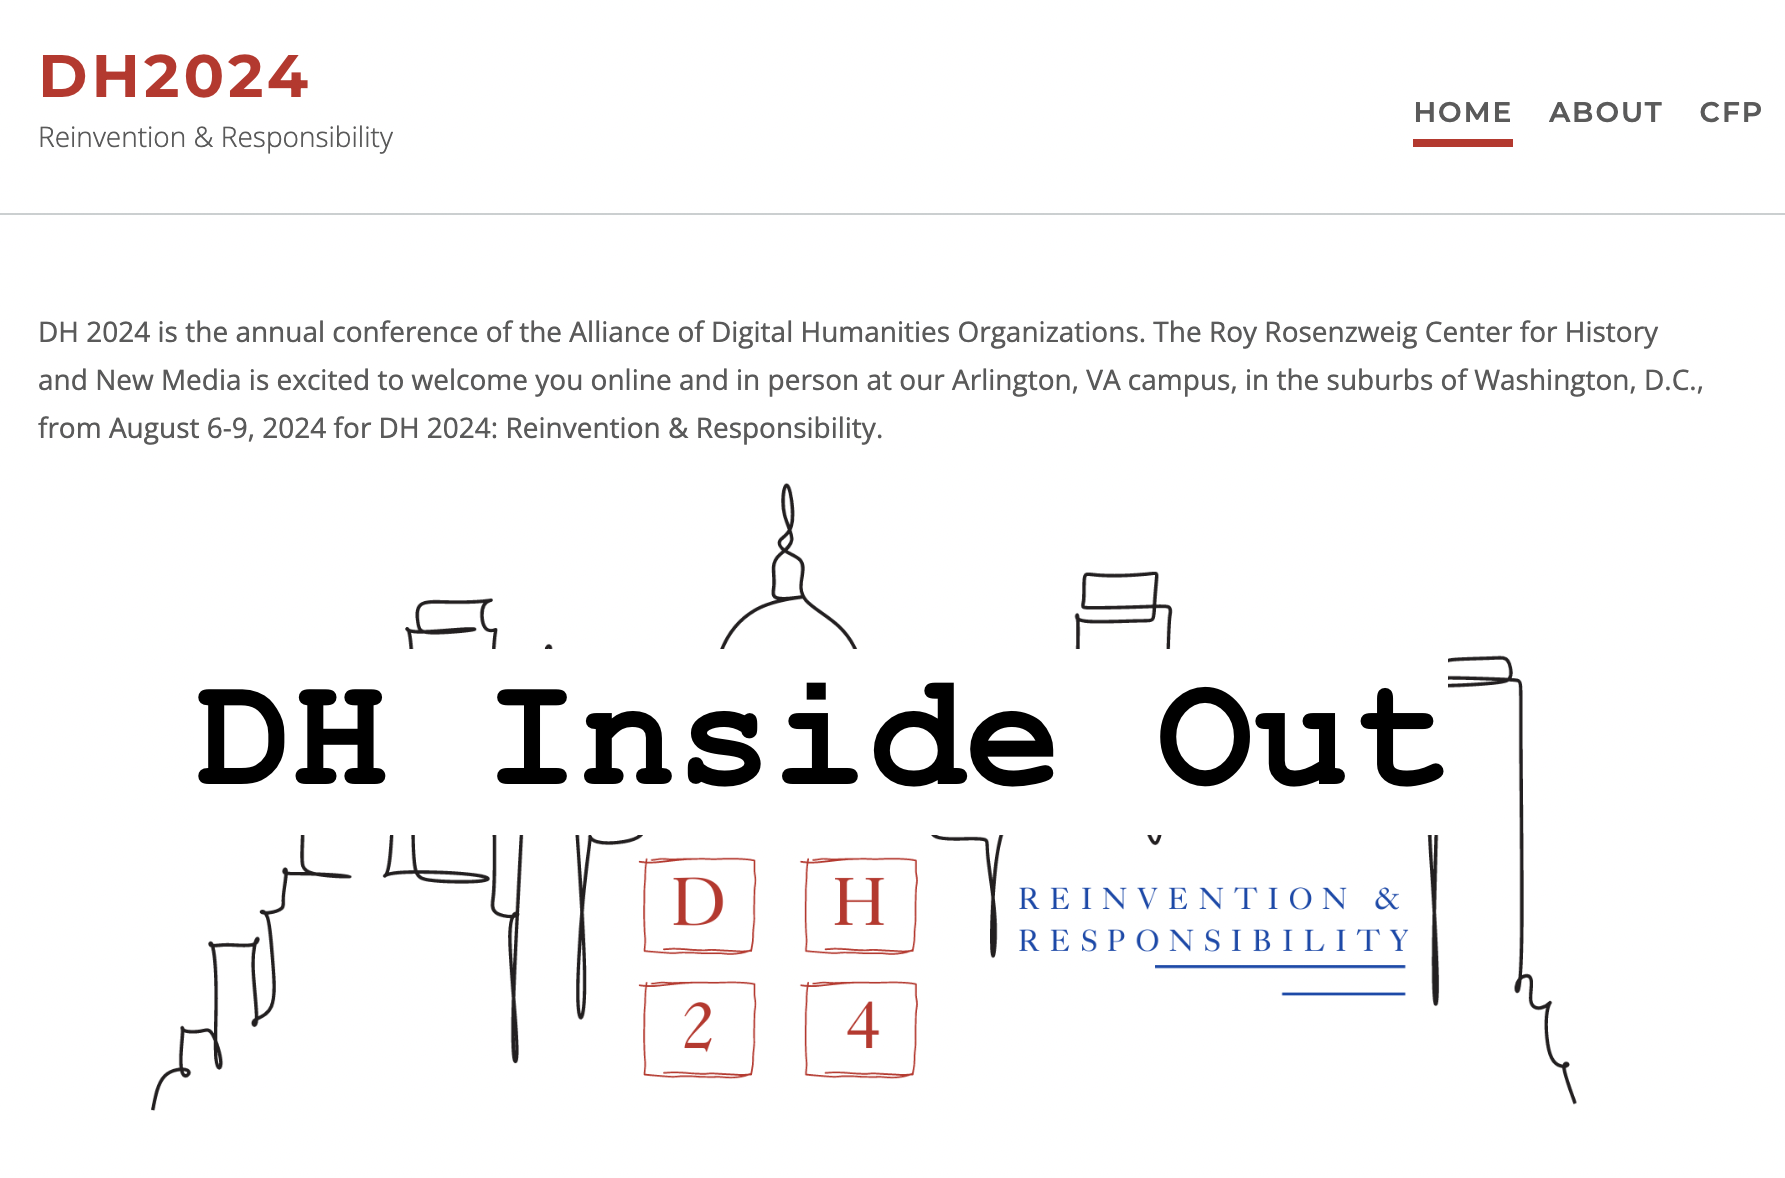 Final deadline extension for DH2024 Mini-conference “DH Inside Out”